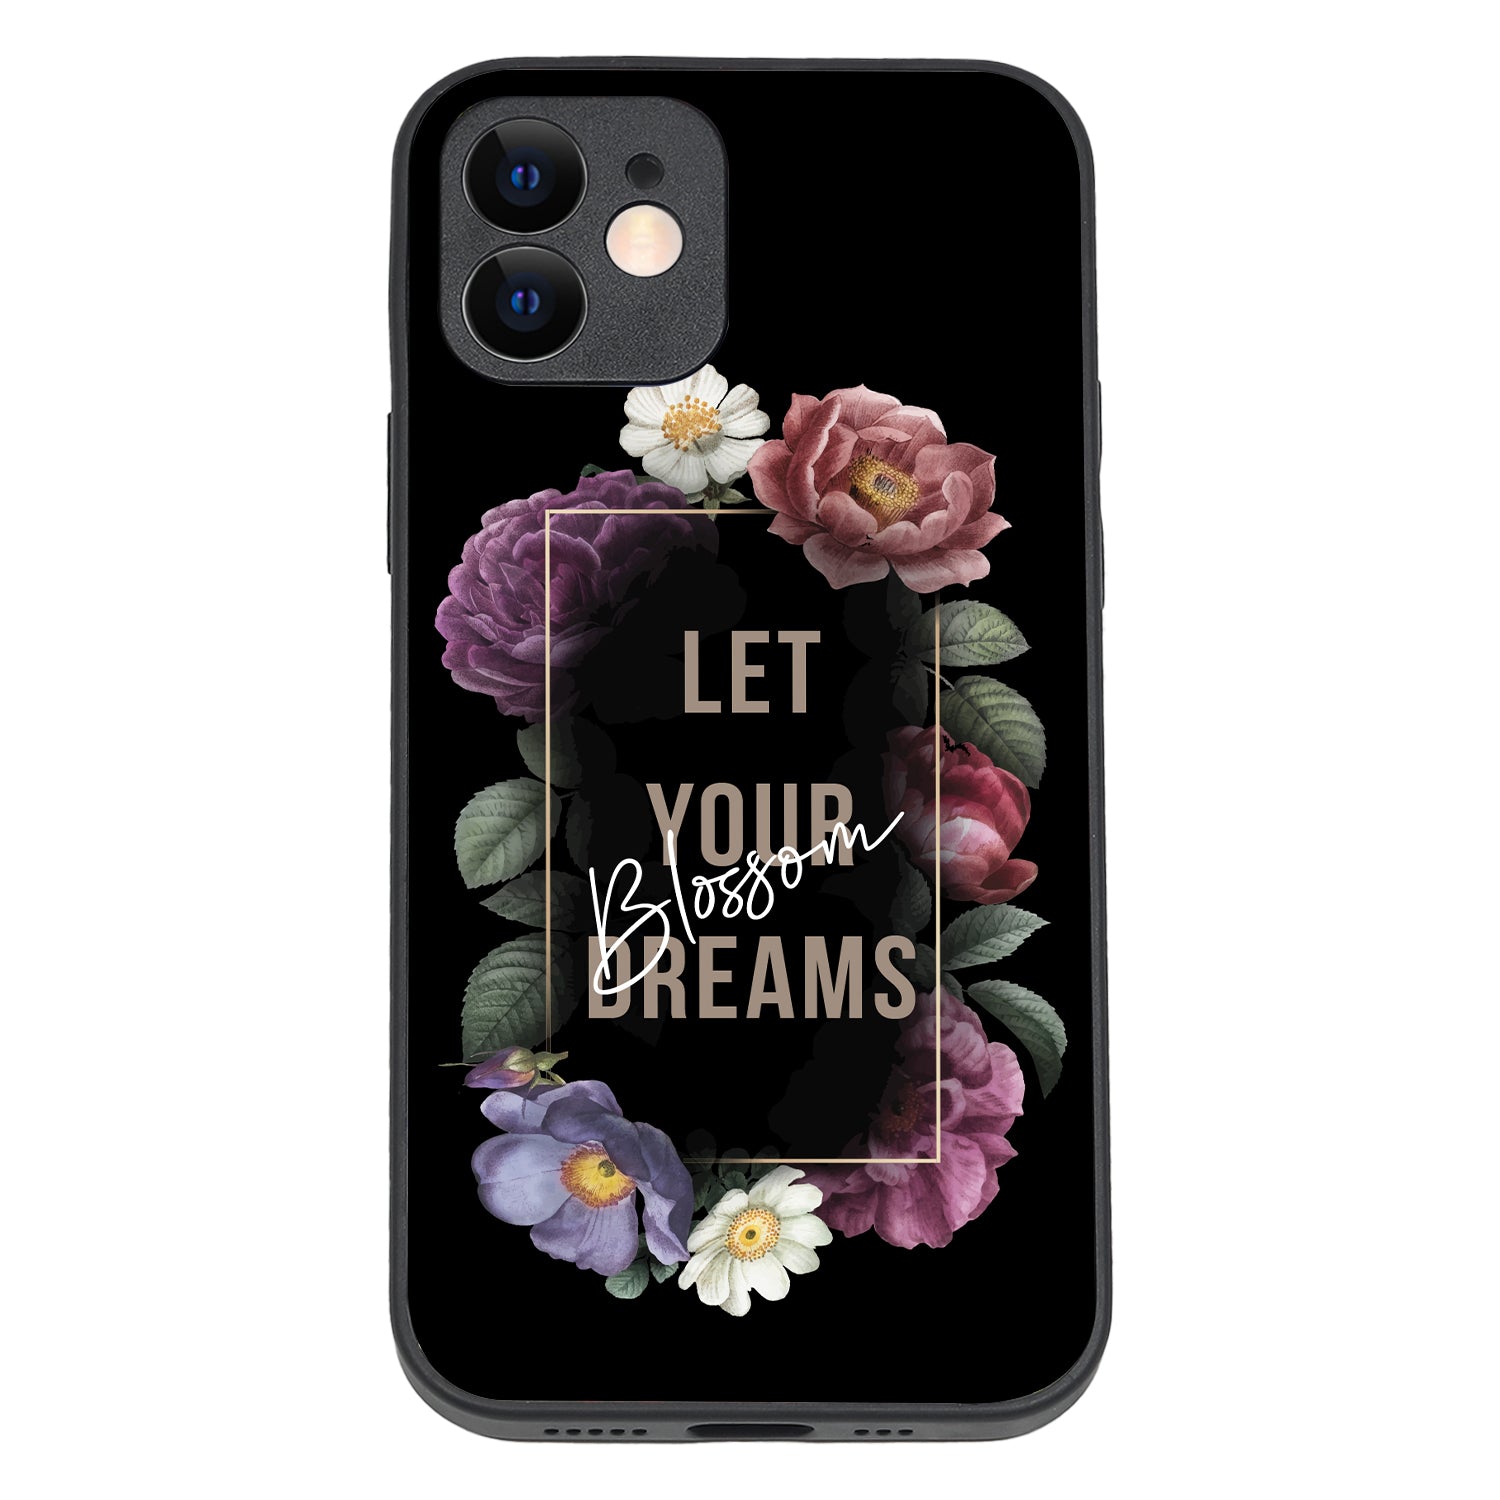 Blossom Dreams Floral iPhone 12 Case